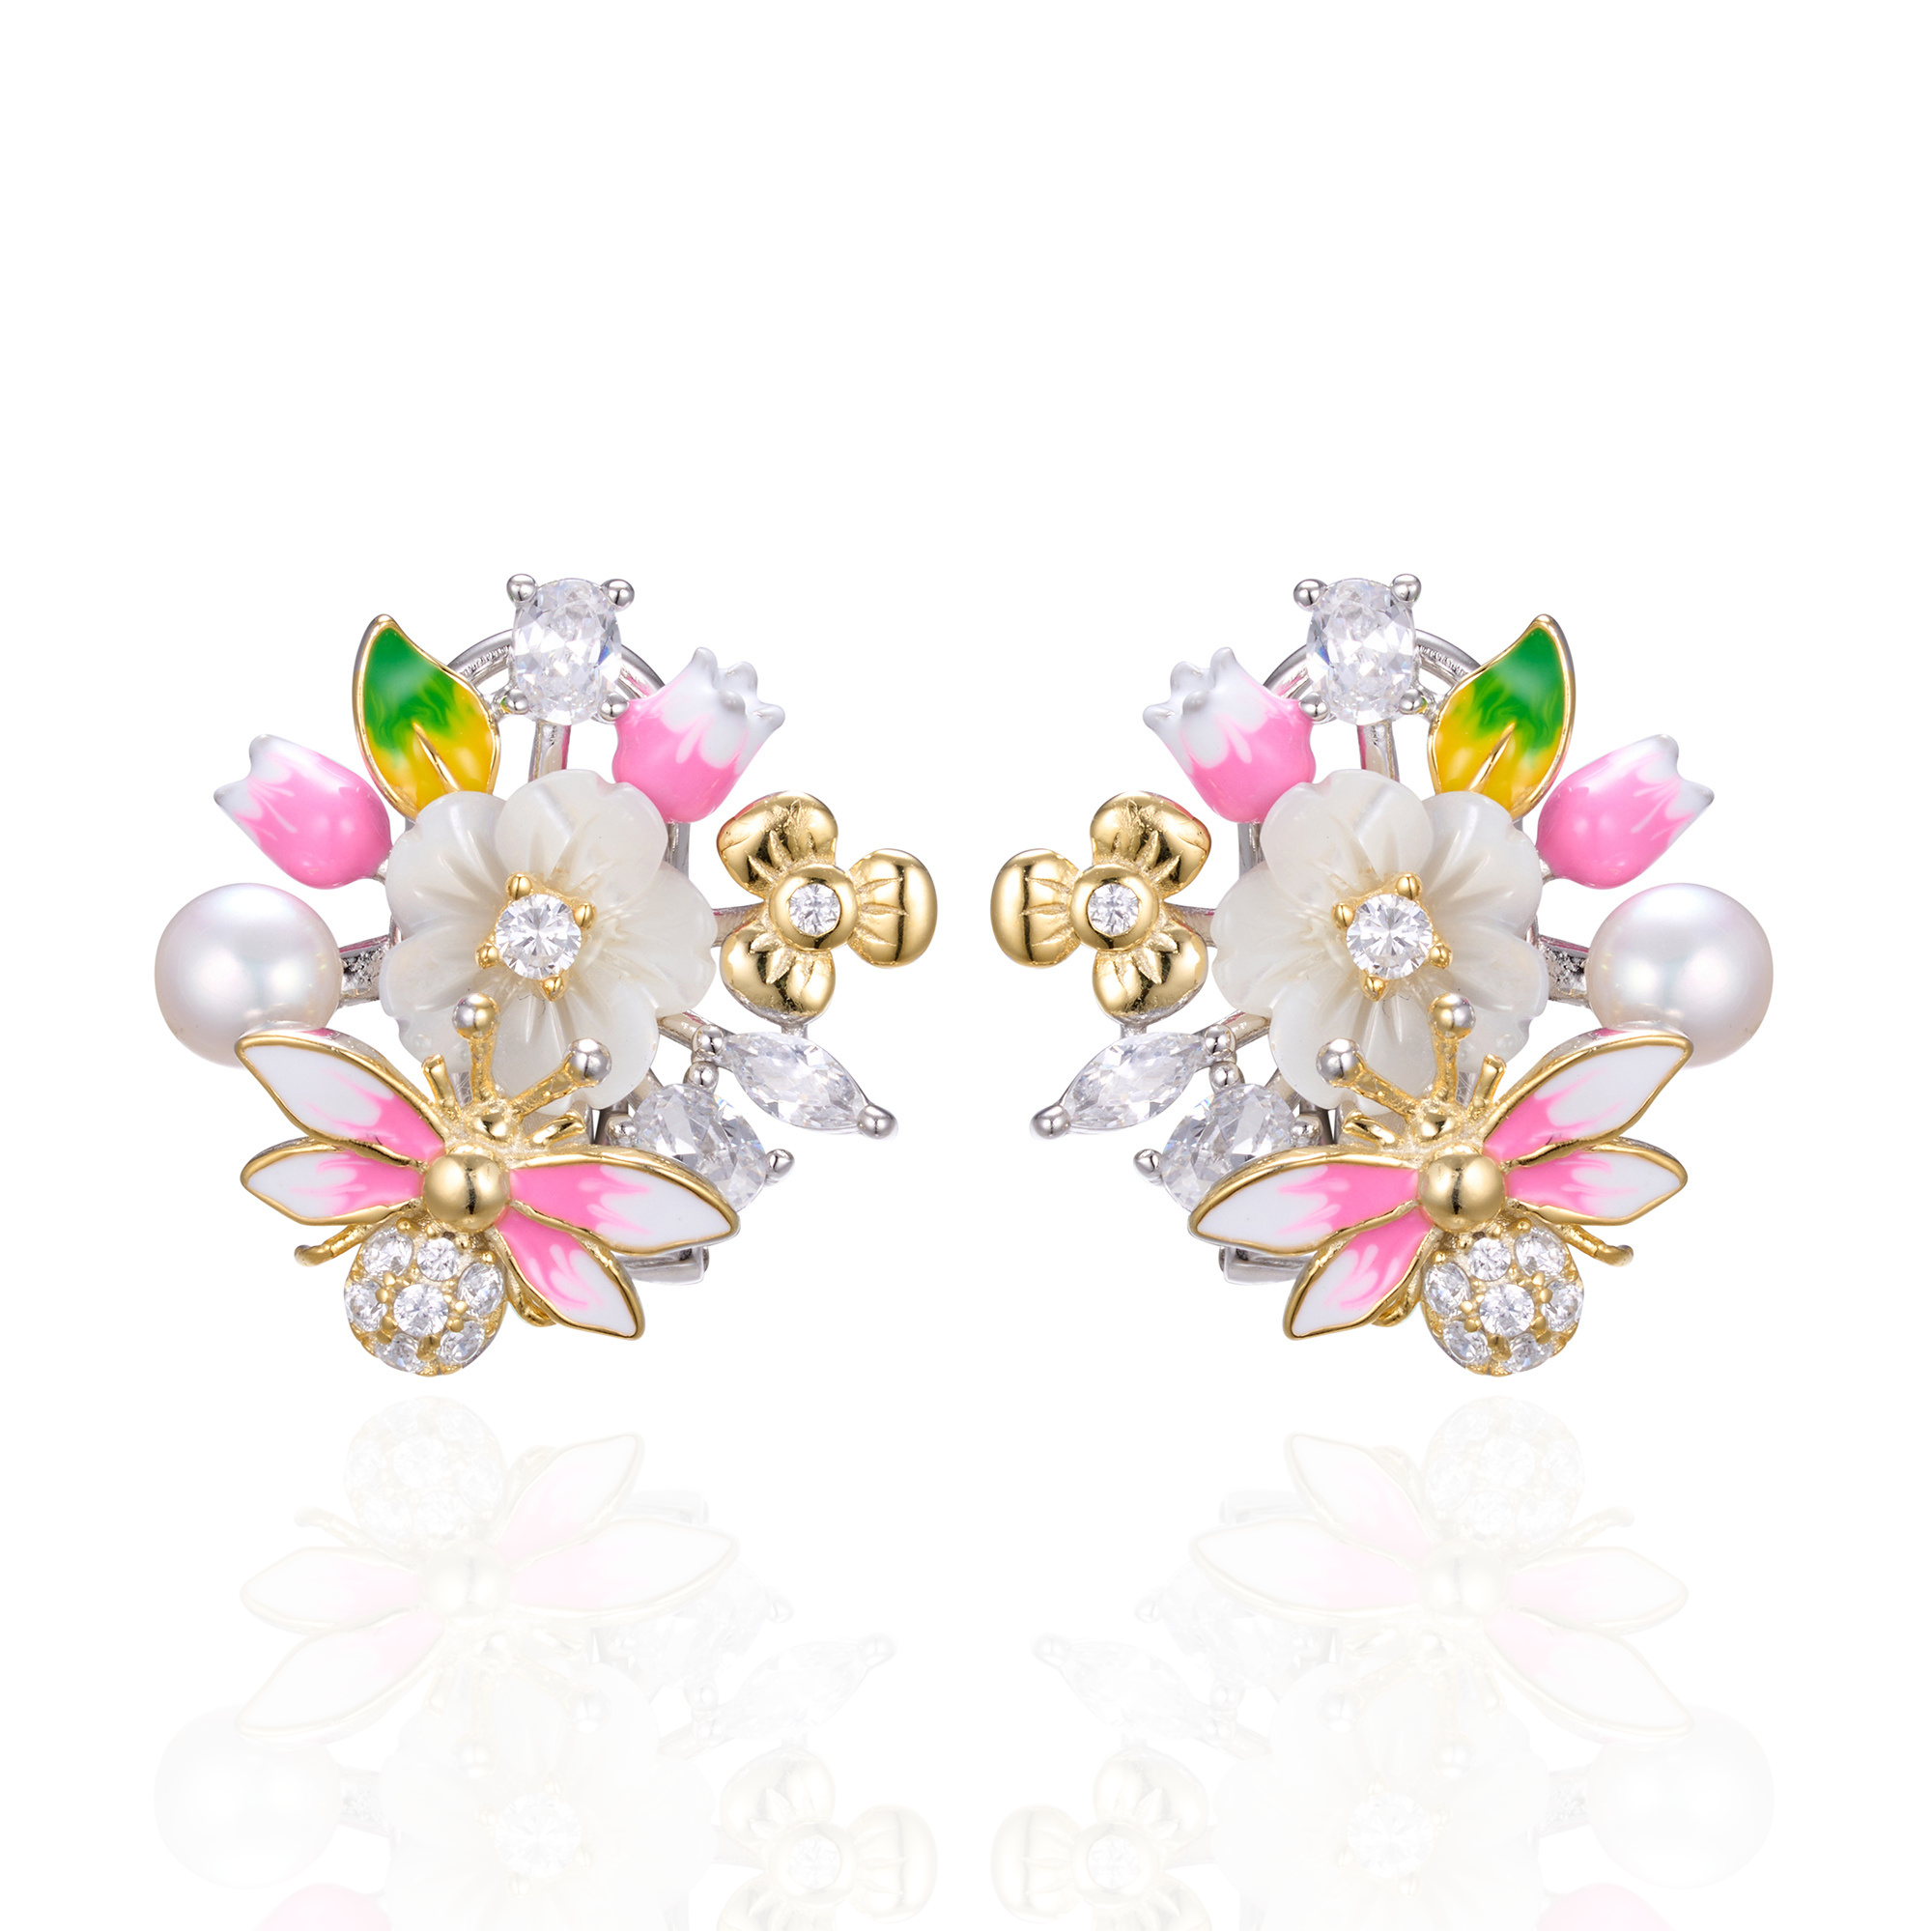 A pair of silver gold plated earrings with pearls, shell flowers and a pink butterfly charm.